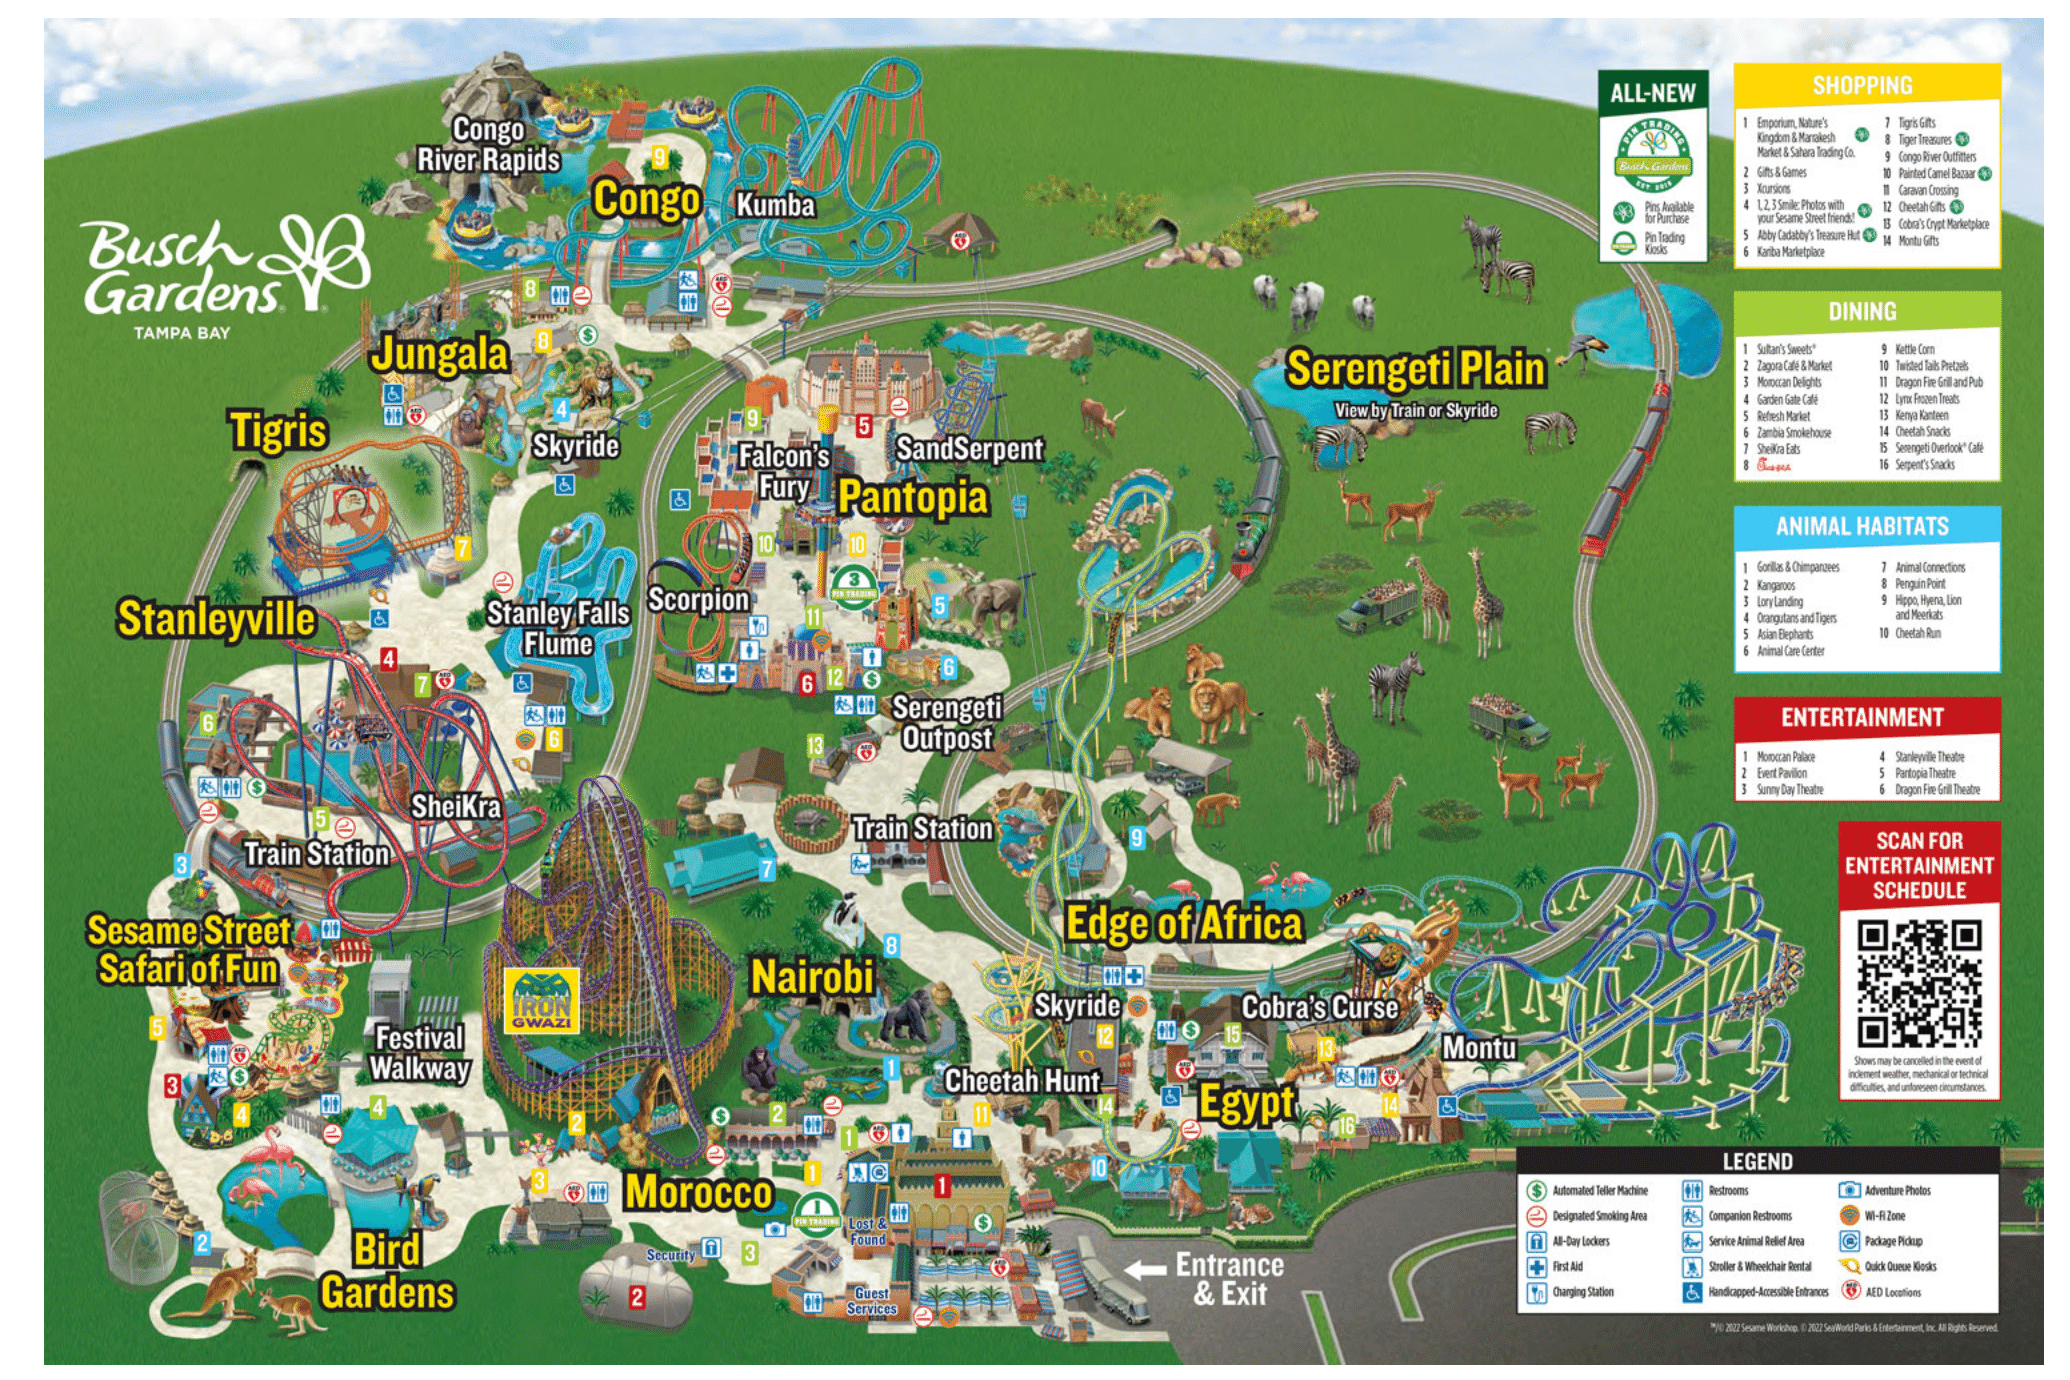 2022 Busch Gardens Tampa Bay Guide Tickets, Rides, Tips and More